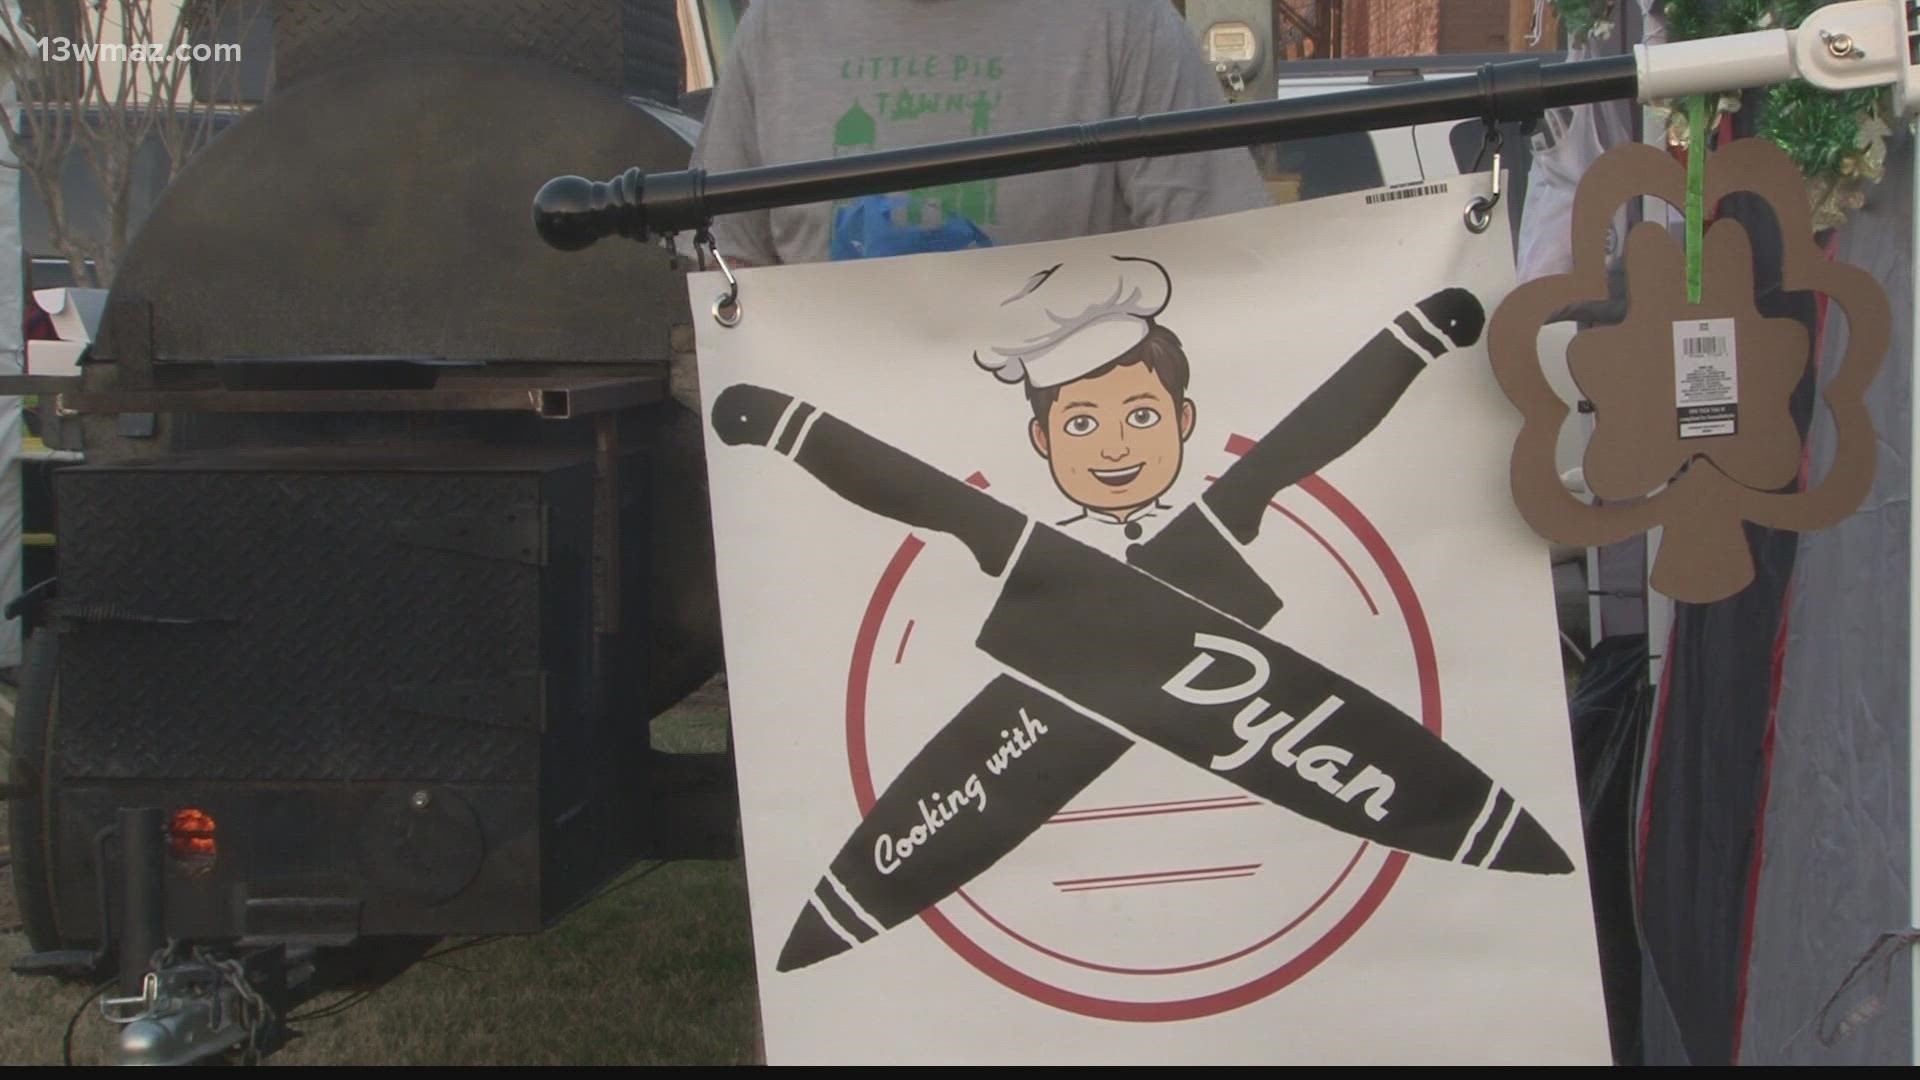 This year brings 27 different pitmasters to Dublin vying for the title, but there's a newcomer: 10-year-old Dylan Gruber.